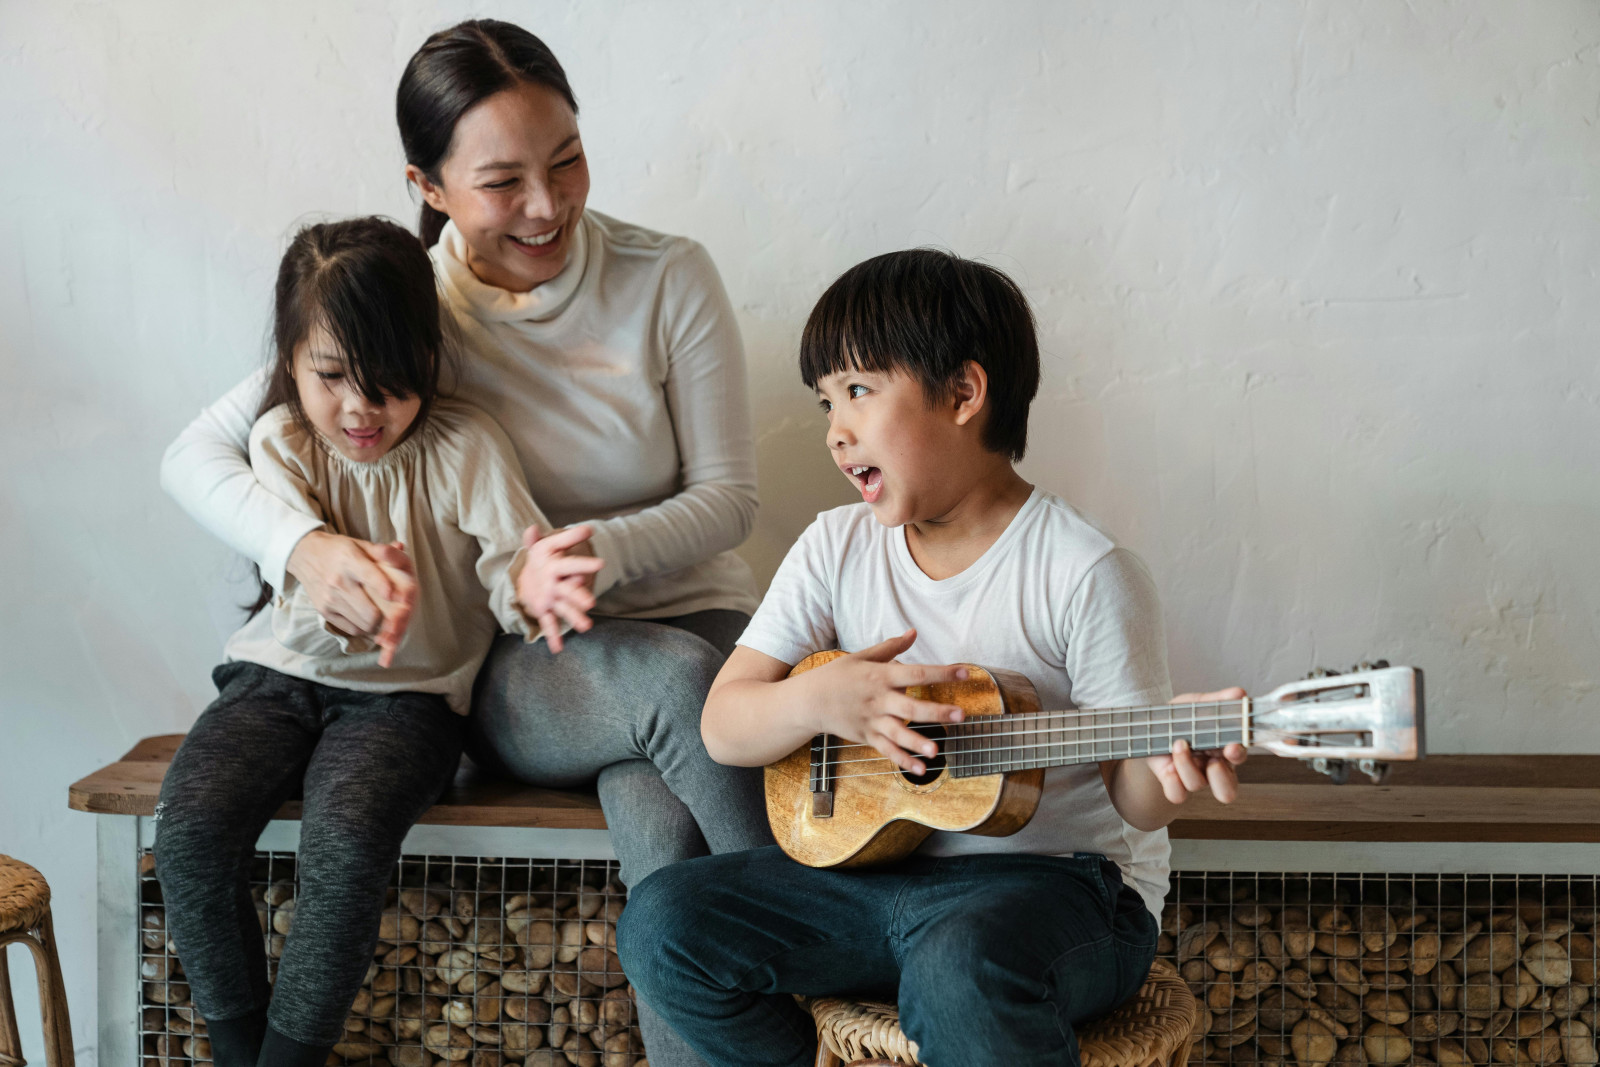 The Importance of Introducing Children to Rich and Wholesome Music or "Living Songs"